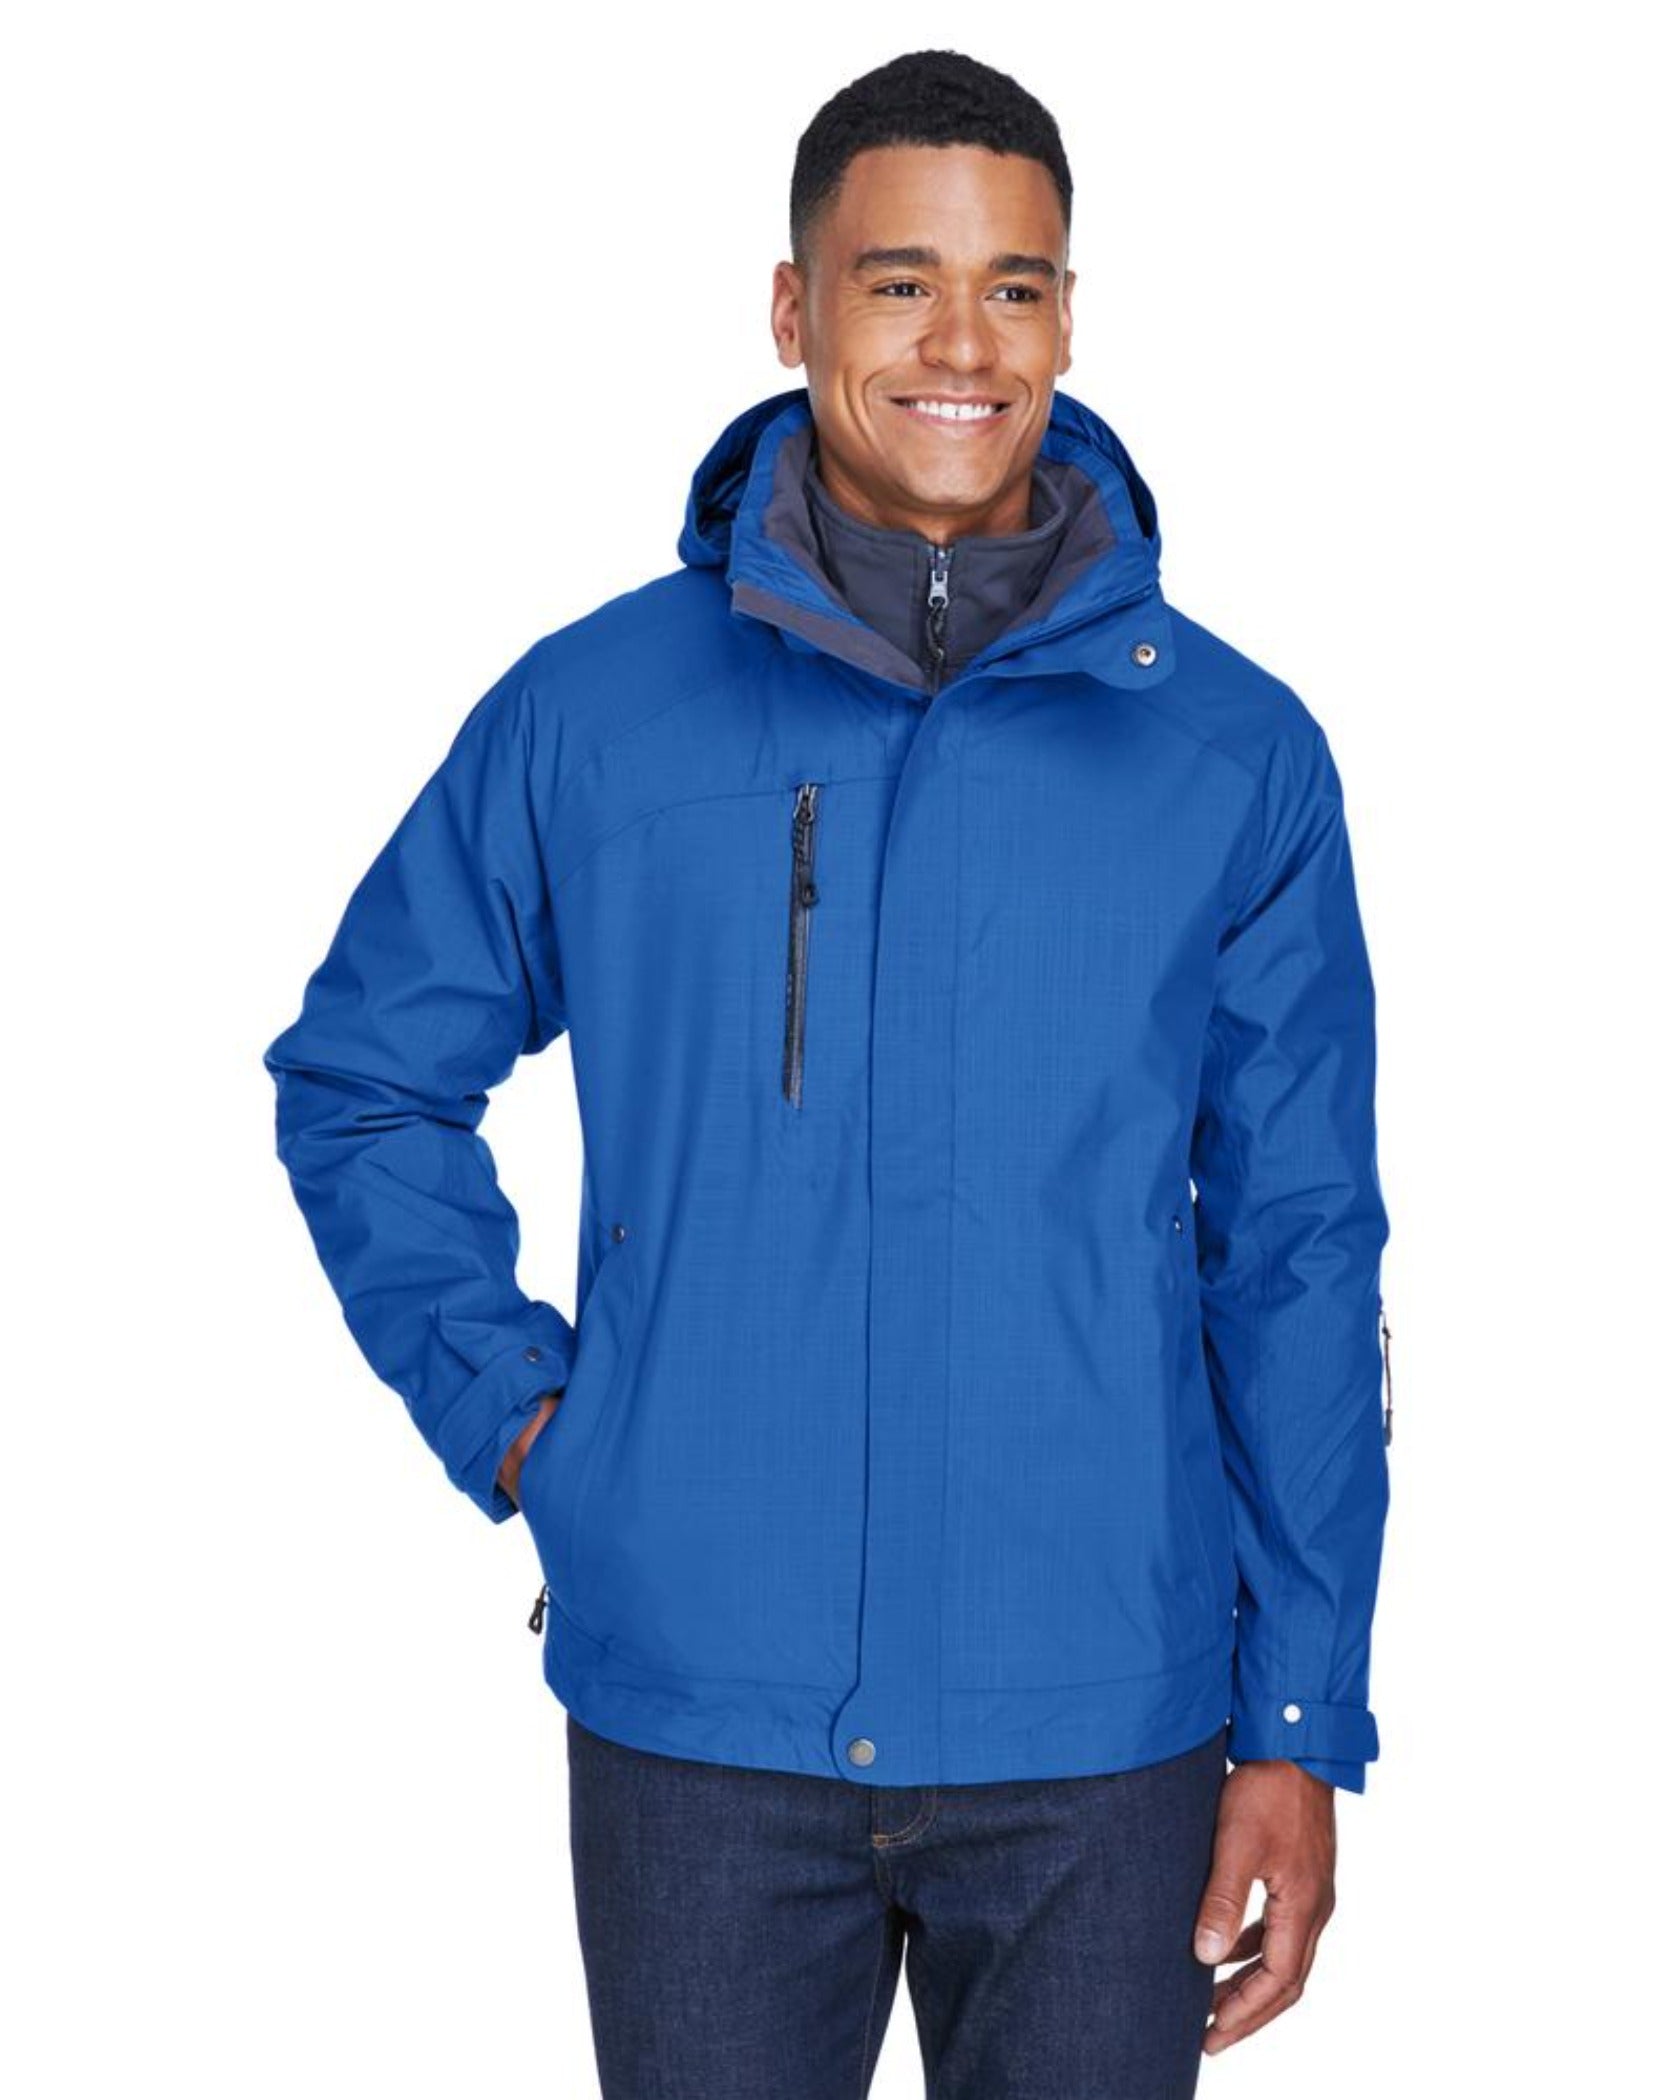 Men's Caprice 3-in-1 Jacket with Softshell Liner